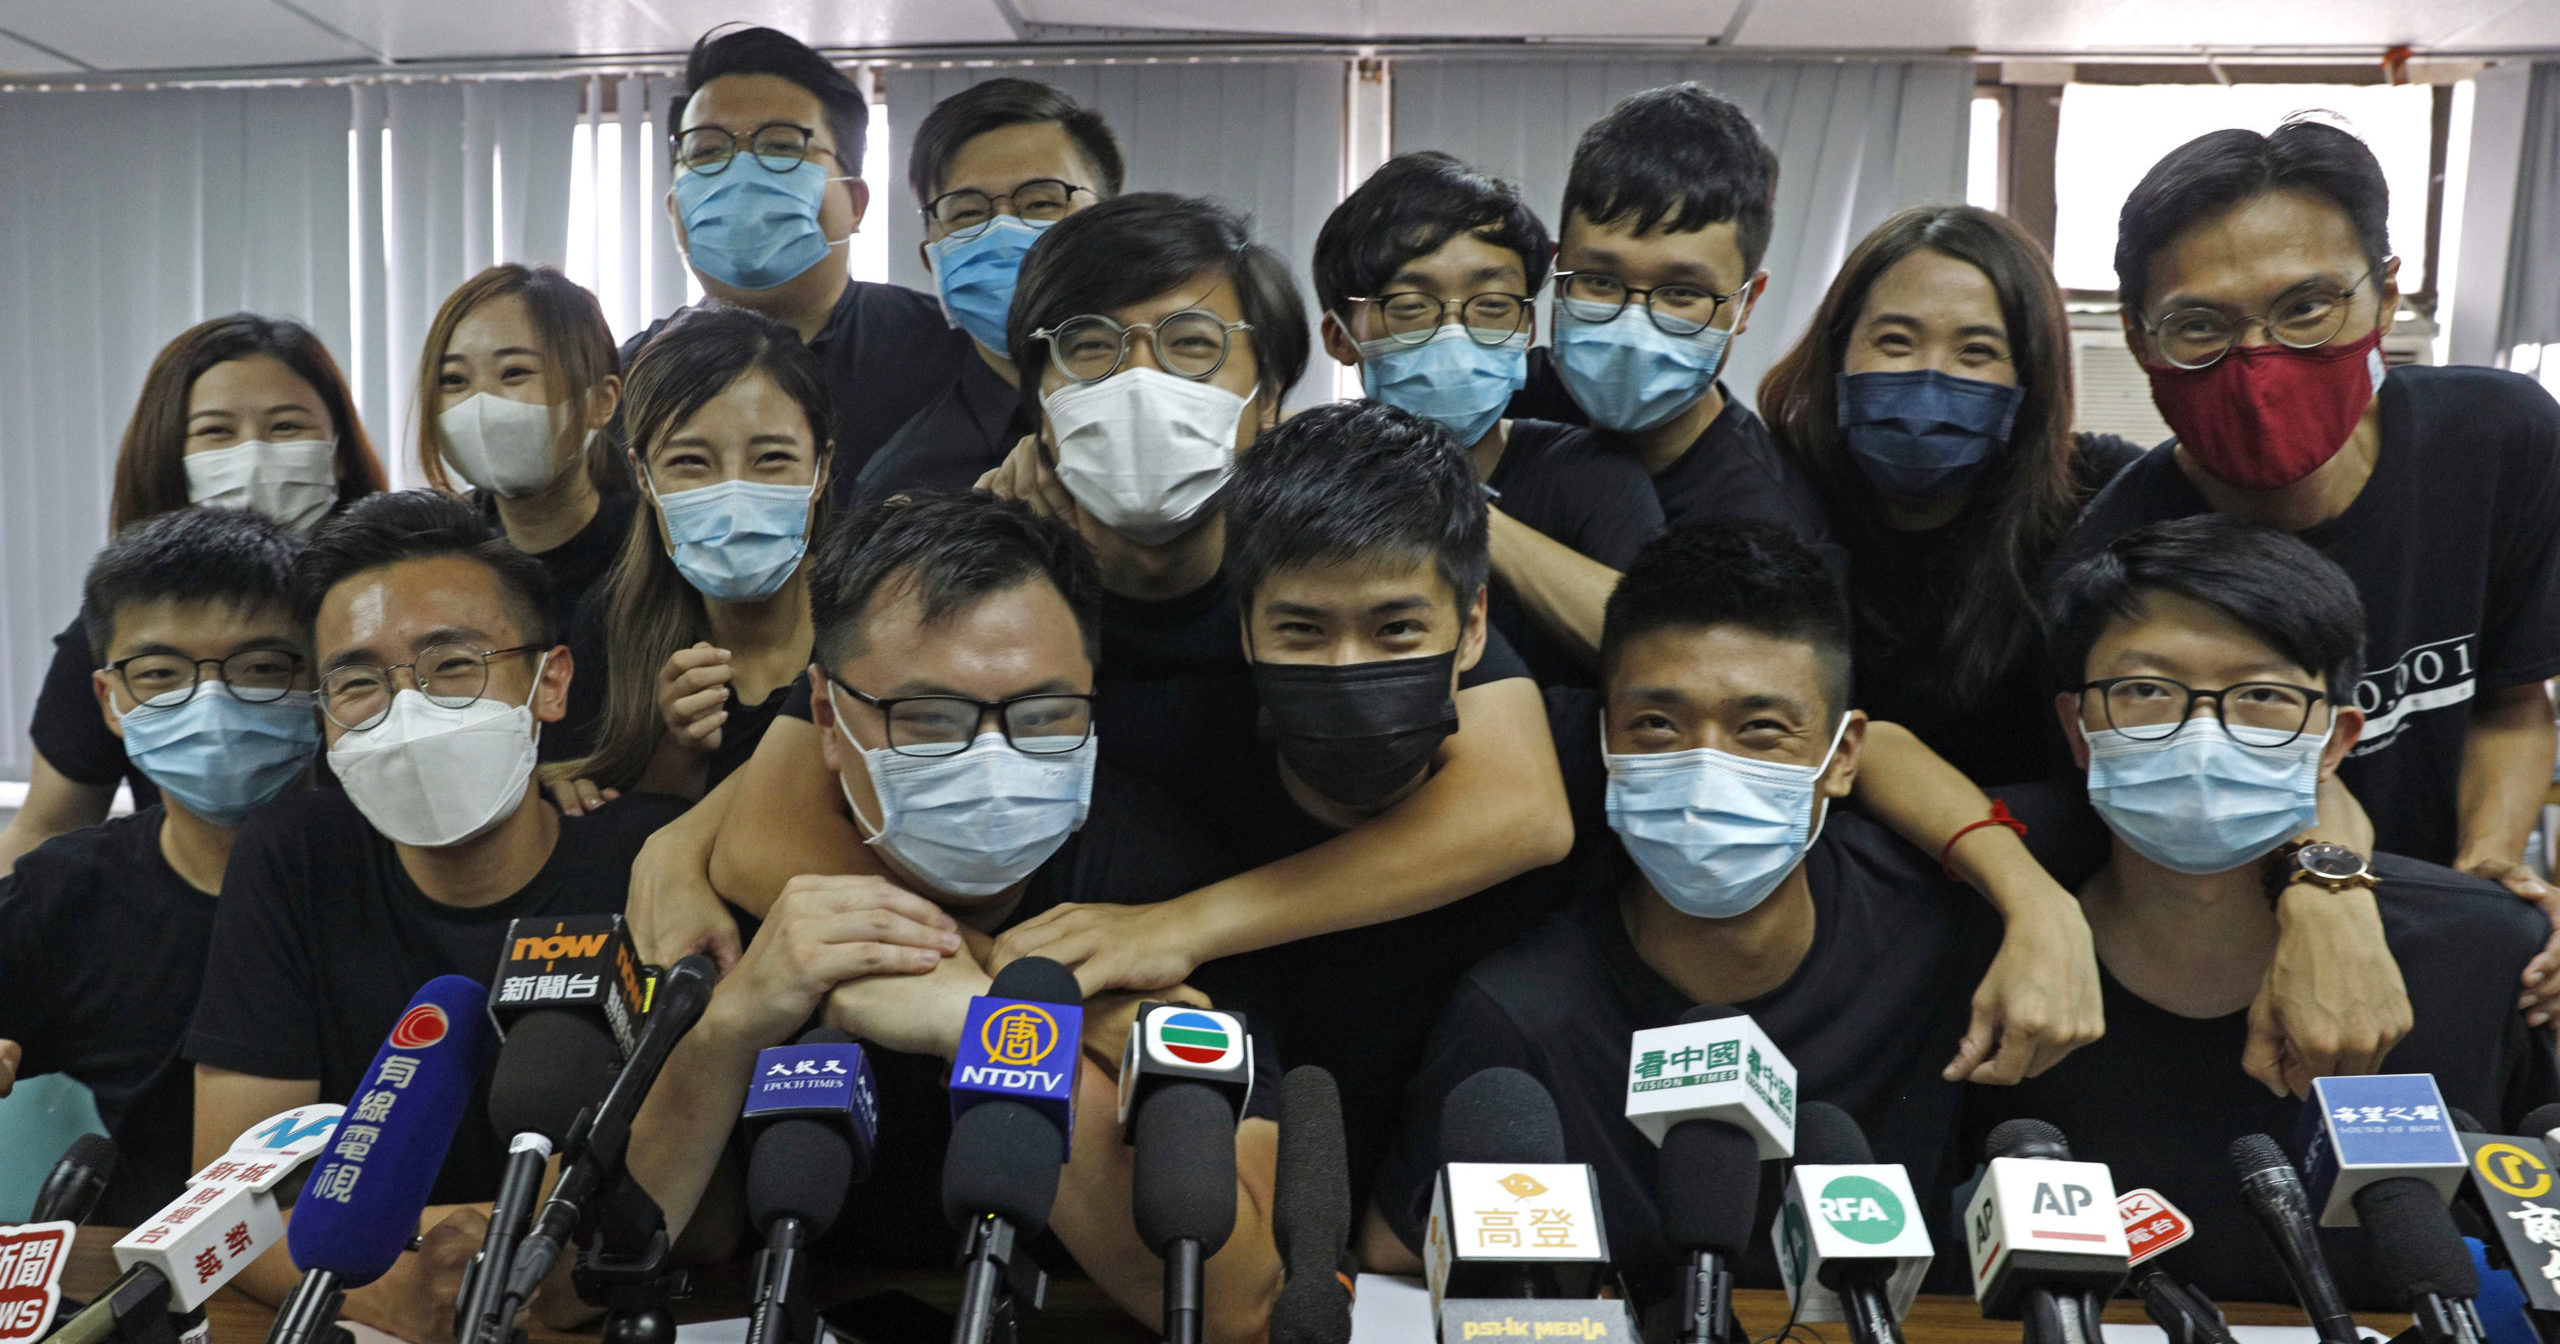 Pro-democracy activists who were elected in unofficial pro-democracy primaries attend a news conference in Hong Kong on July 15, 2020.